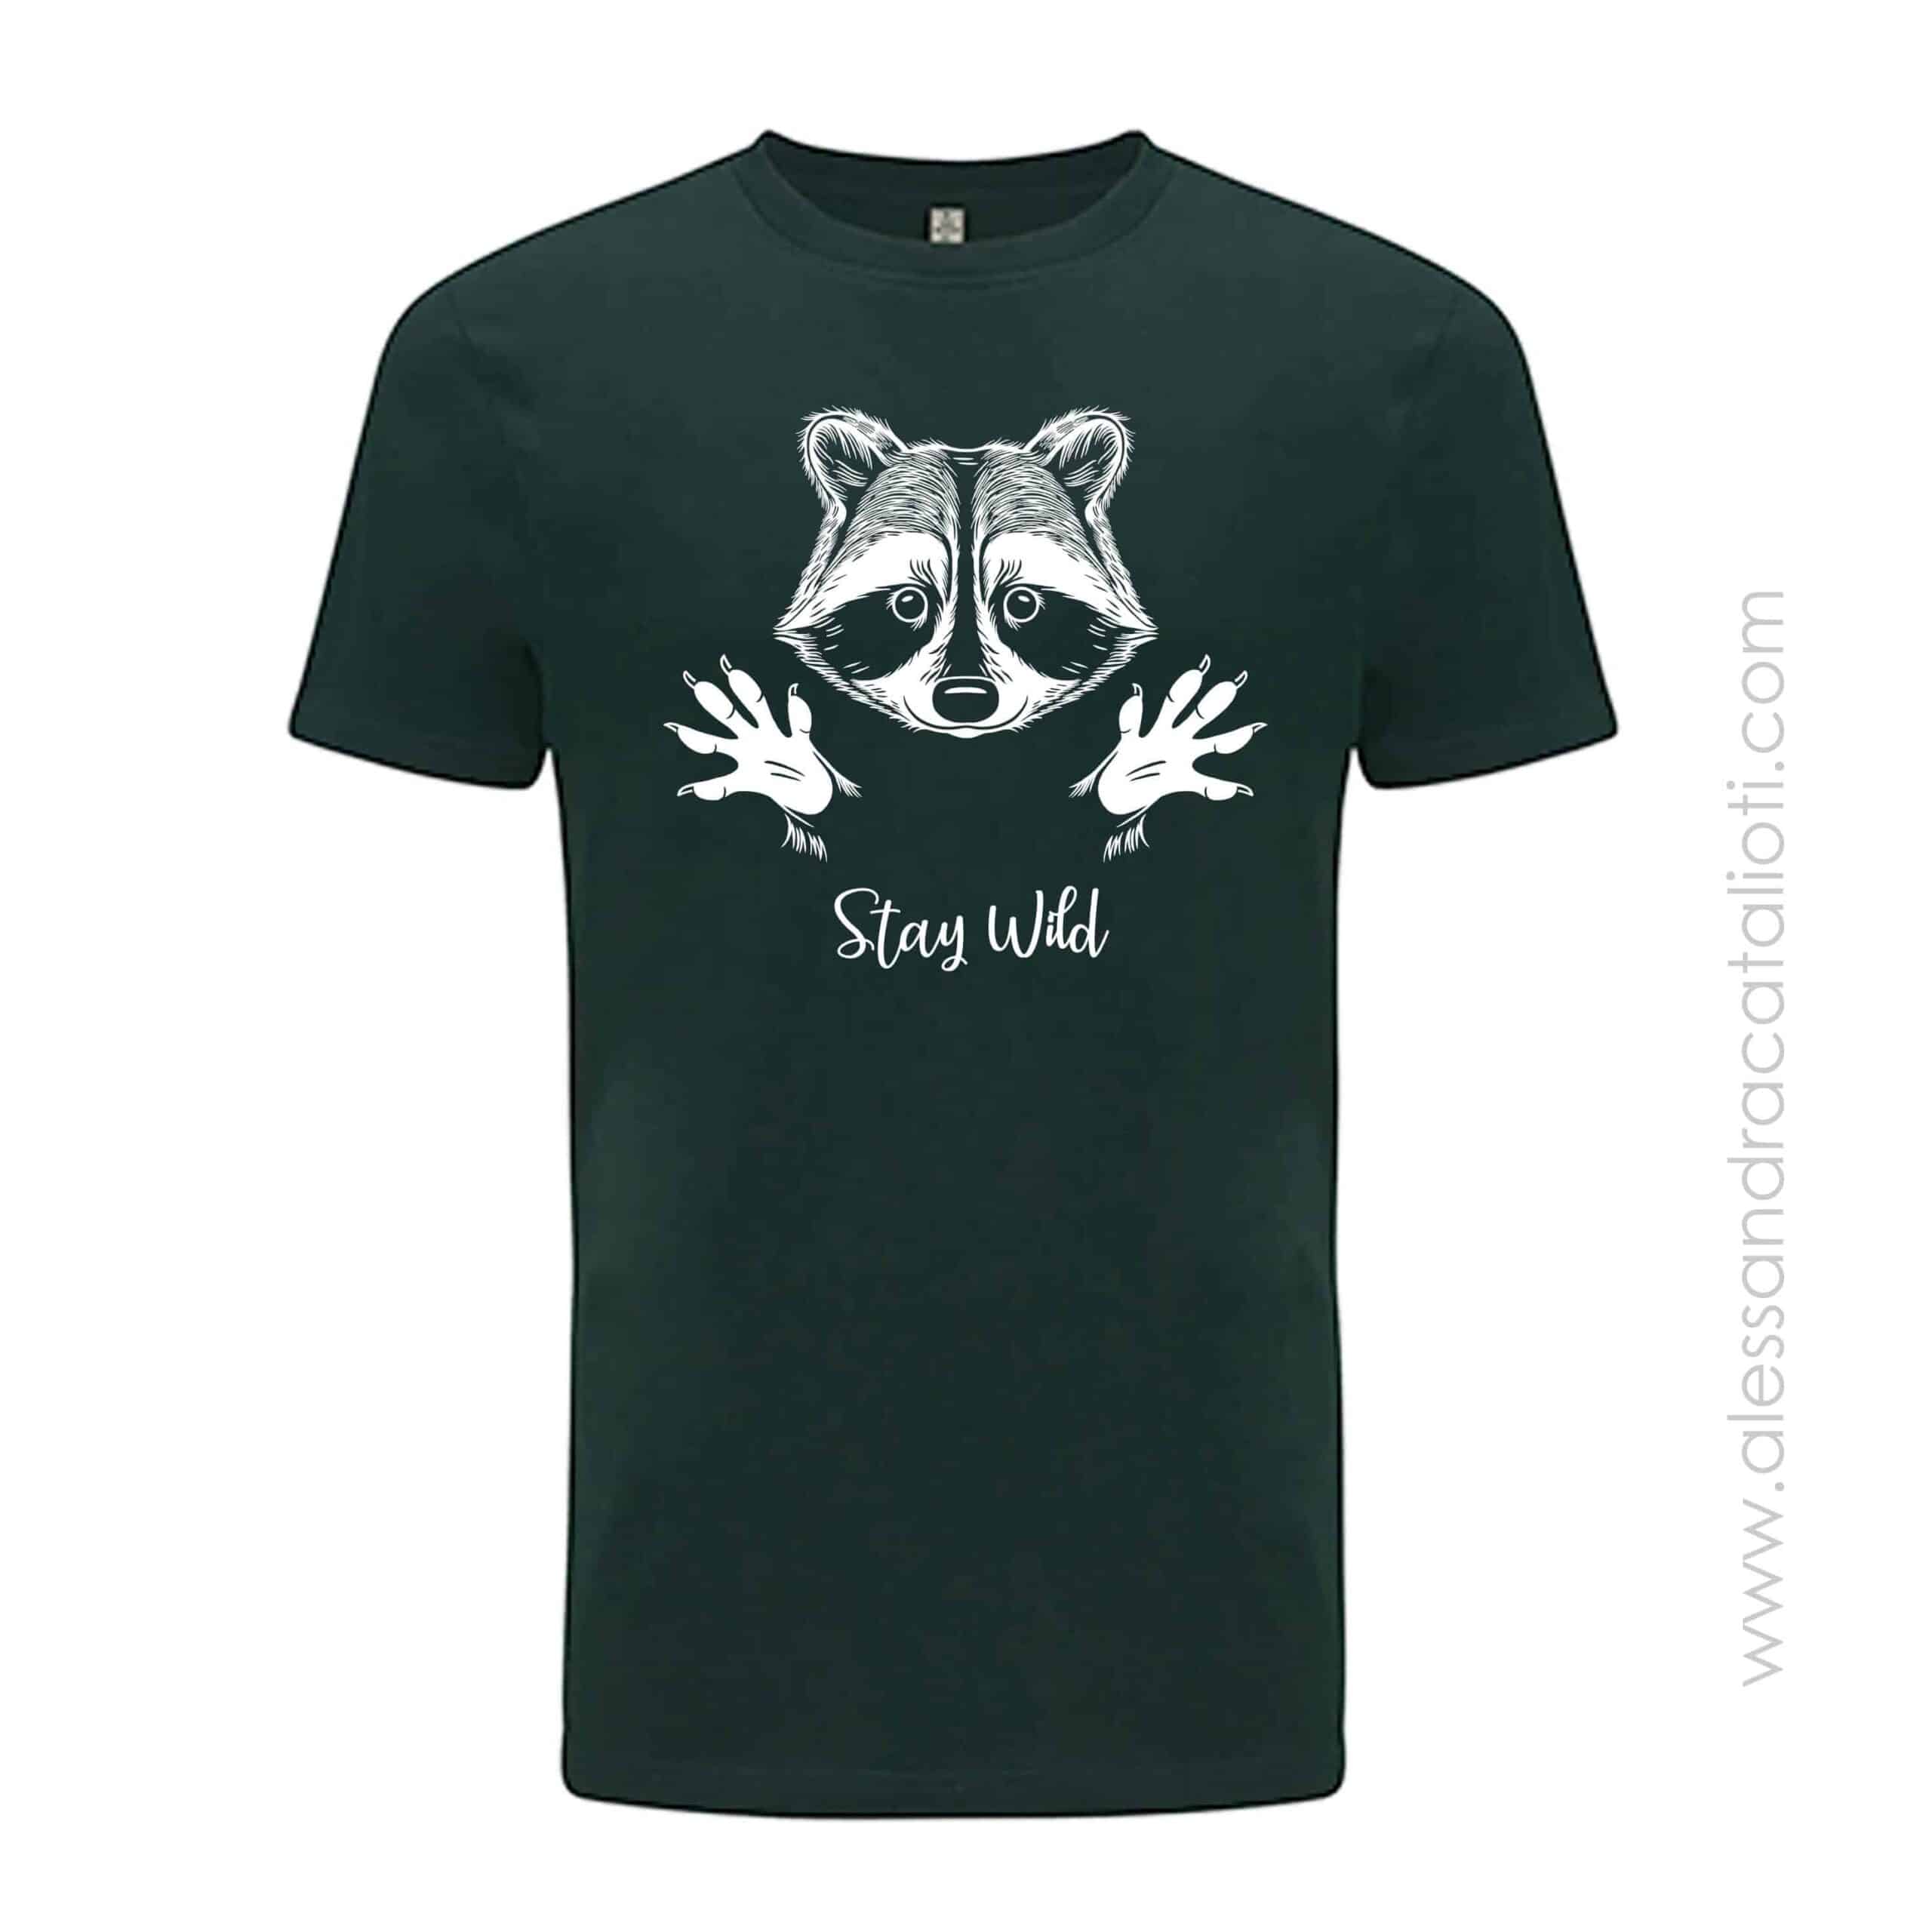 Vegan t-shirt unisex made raccoon material recycled from 100% 